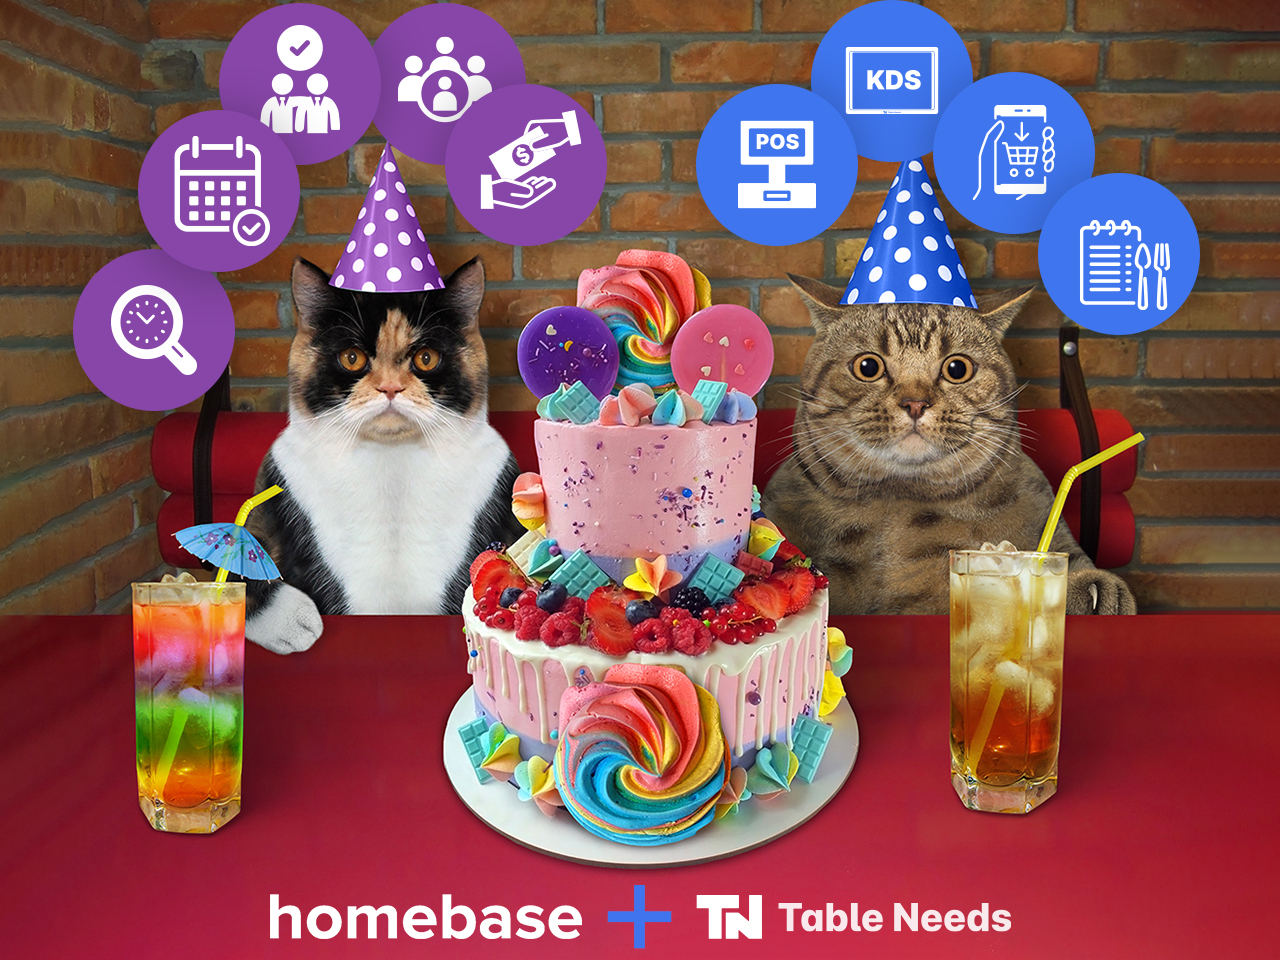 Two cats celebrating the Table Needs and Homebase joining forces. The are at a restaurant with a big cake and fancy drinks.